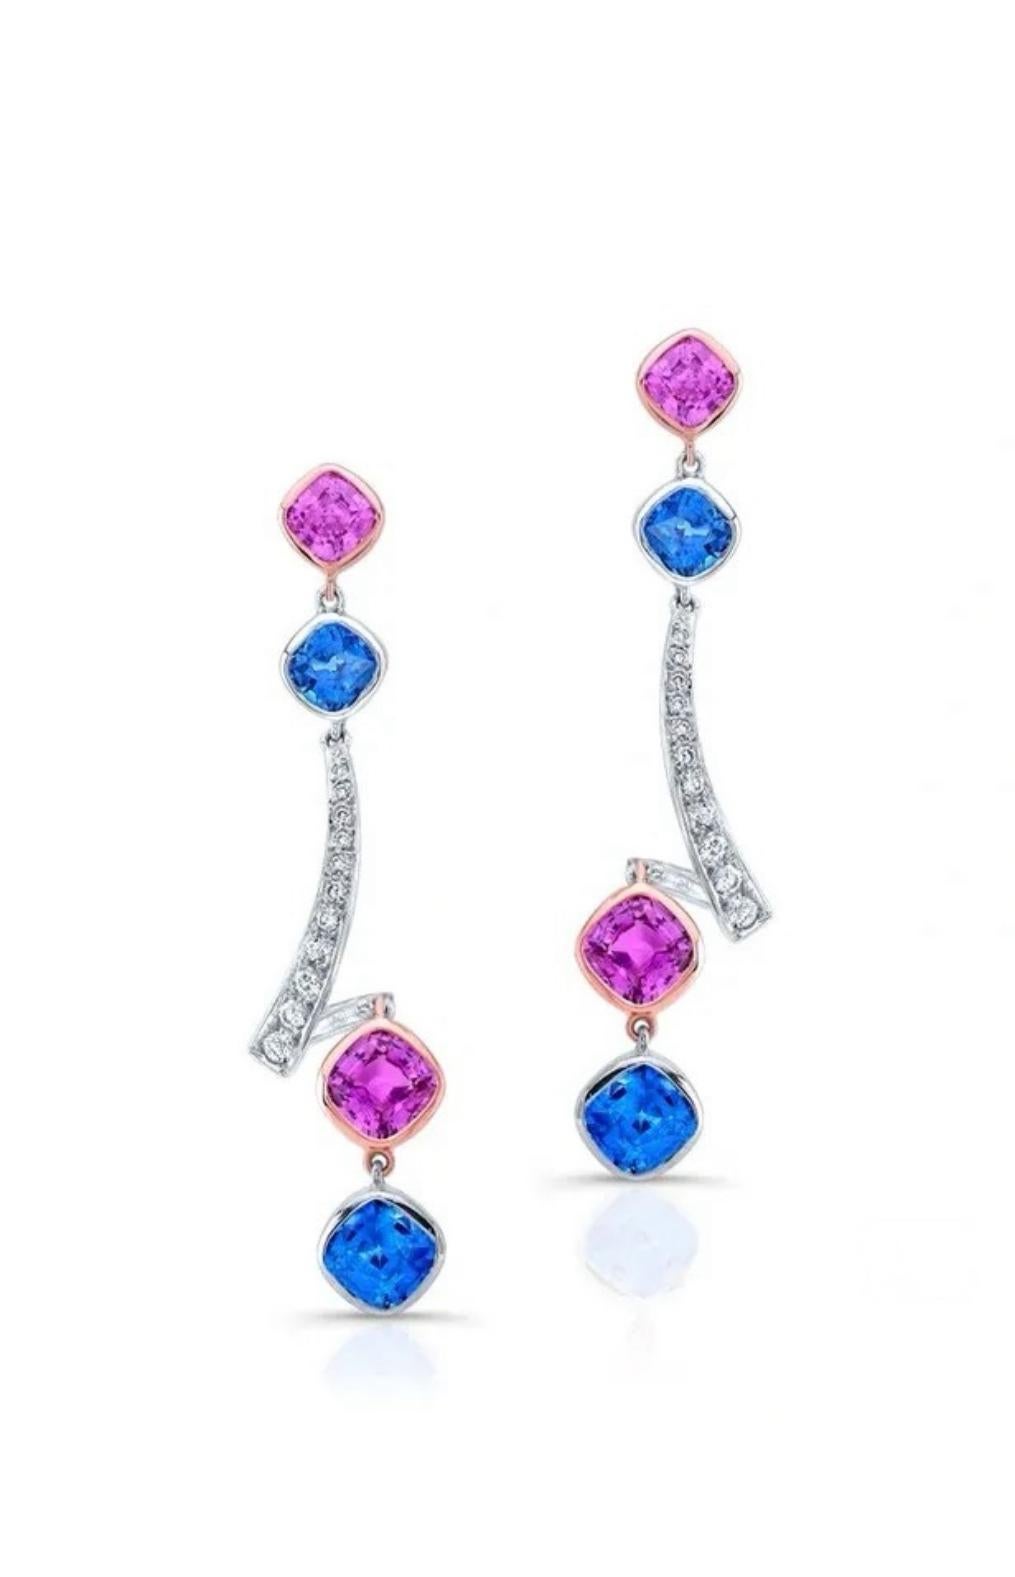 This magical pair of earrings toasts the cohesion of design. Four pink sapphires totaling 3.53 carats and four blue sapphires totaling 4.06 carats are beautifully adorned by 0.36 carats of white diamonds, magnifying the glow to these 18K white with